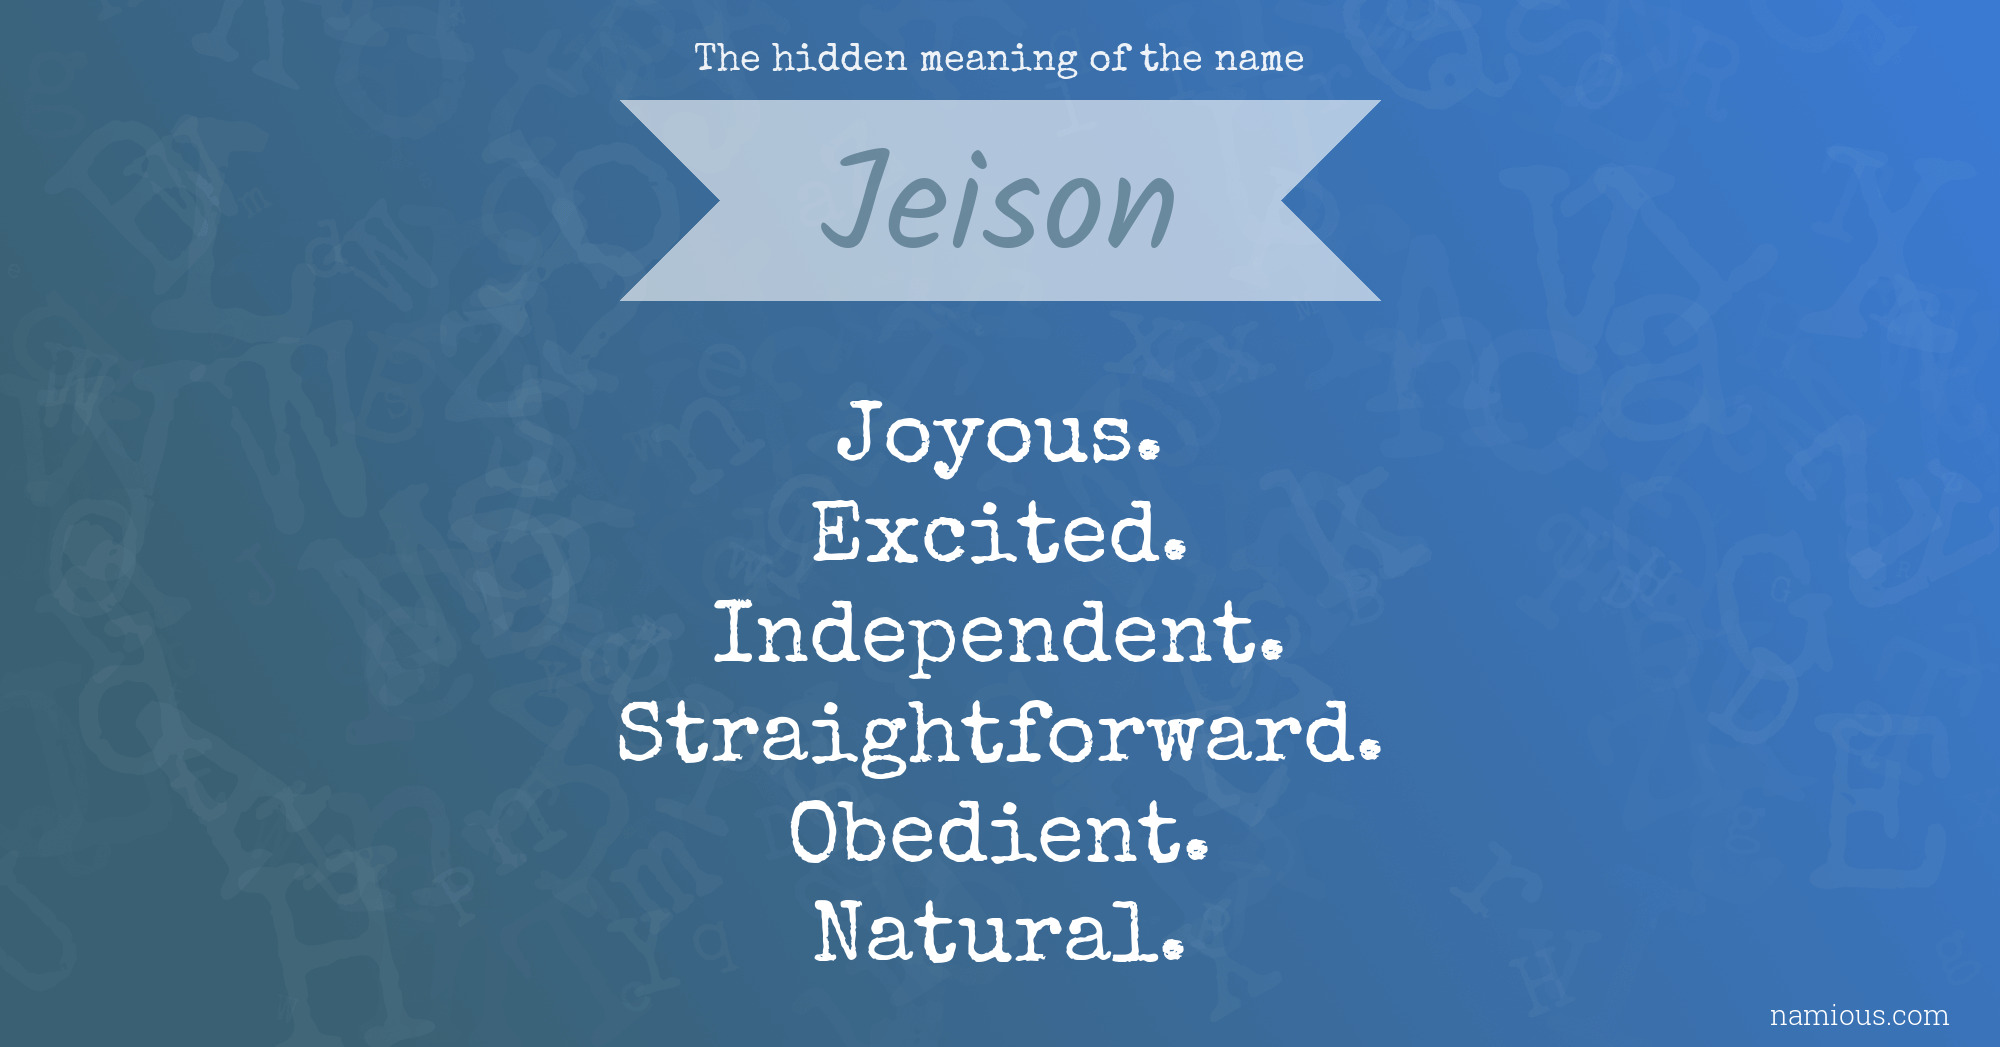 The hidden meaning of the name Jeison